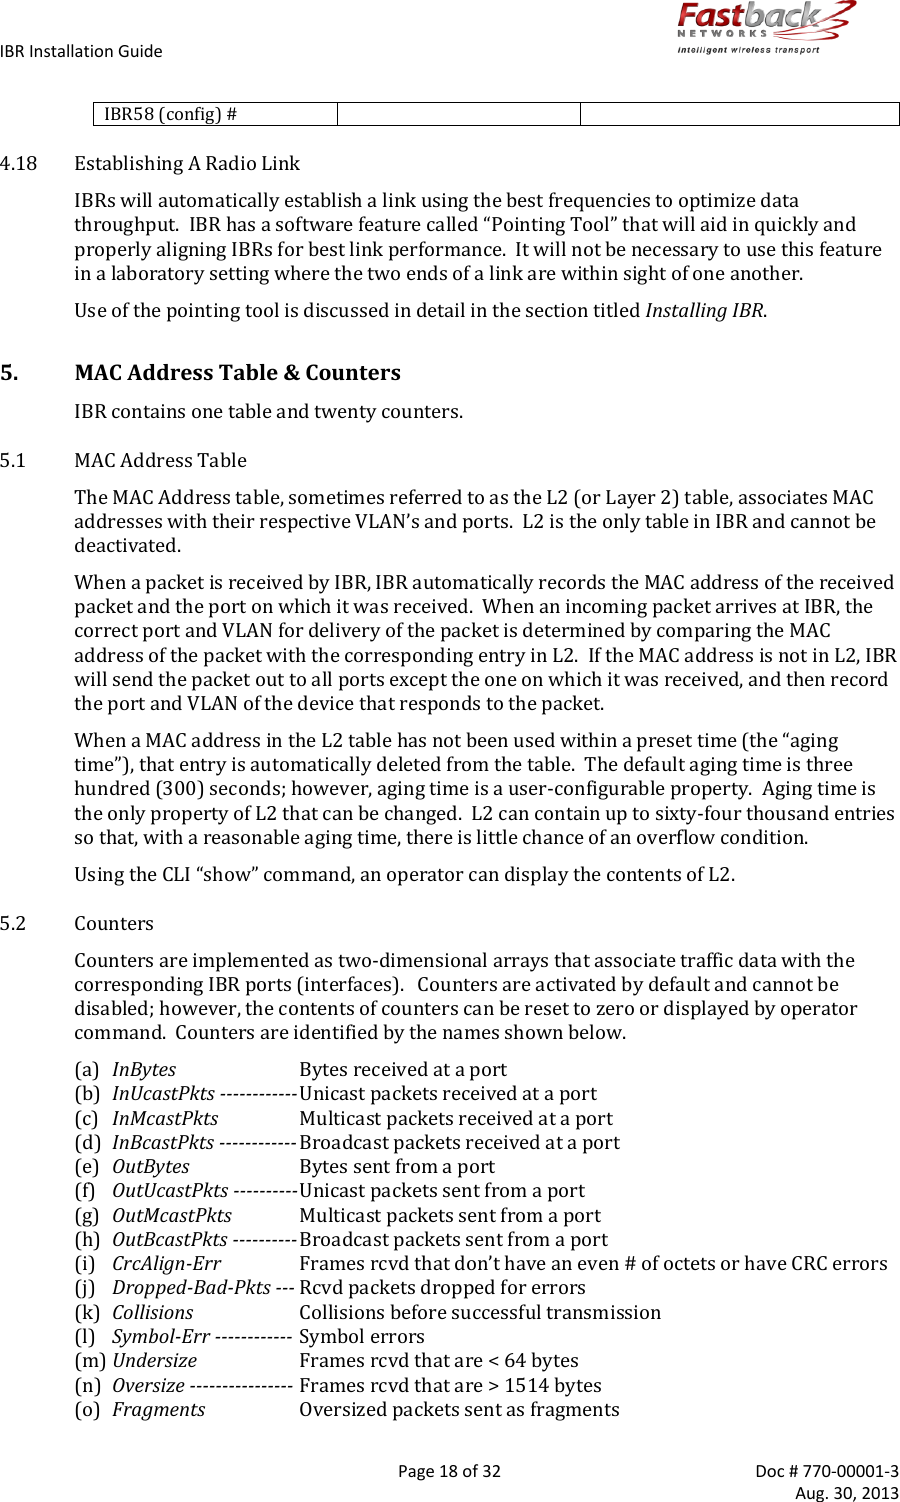 IBR Installation Guide        Page 18 of 32  Doc # 770-00001-3     Aug. 30, 2013   IBR58 (config) #   4.18 Establishing A Radio Link IBRs will automatically establish a link using the best frequencies to optimize data throughput.  IBR has a software feature called “Pointing Tool” that will aid in quickly and properly aligning IBRs for best link performance.  It will not be necessary to use this feature in a laboratory setting where the two ends of a link are within sight of one another.  Use of the pointing tool is discussed in detail in the section titled Installing IBR. 5. MAC Address Table &amp; Counters IBR contains one table and twenty counters. 5.1 MAC Address Table The MAC Address table, sometimes referred to as the L2 (or Layer 2) table, associates MAC addresses with their respective VLAN’s and ports.  L2 is the only table in IBR and cannot be deactivated.  When a packet is received by IBR, IBR automatically records the MAC address of the received packet and the port on which it was received.  When an incoming packet arrives at IBR, the correct port and VLAN for delivery of the packet is determined by comparing the MAC address of the packet with the corresponding entry in L2.  If the MAC address is not in L2, IBR will send the packet out to all ports except the one on which it was received, and then record the port and VLAN of the device that responds to the packet. When a MAC address in the L2 table has not been used within a preset time (the “aging time”), that entry is automatically deleted from the table.  The default aging time is three hundred (300) seconds; however, aging time is a user-configurable property.  Aging time is the only property of L2 that can be changed.  L2 can contain up to sixty-four thousand entries so that, with a reasonable aging time, there is little chance of an overflow condition. Using the CLI “show” command, an operator can display the contents of L2. 5.2 Counters Counters are implemented as two-dimensional arrays that associate traffic data with the corresponding IBR ports (interfaces).   Counters are activated by default and cannot be disabled; however, the contents of counters can be reset to zero or displayed by operator command.  Counters are identified by the names shown below.  (a) InBytes  Bytes received at a port (b) InUcastPkts ------------ Unicast packets received at a port (c) InMcastPkts  Multicast packets received at a port (d) InBcastPkts ------------ Broadcast packets received at a port (e) OutBytes  Bytes sent from a port (f) OutUcastPkts ---------- Unicast packets sent from a port (g) OutMcastPkts  Multicast packets sent from a port (h) OutBcastPkts ---------- Broadcast packets sent from a port (i) CrcAlign-Err Frames rcvd that don’t have an even # of octets or have CRC errors (j) Dropped-Bad-Pkts --- Rcvd packets dropped for errors (k) Collisions  Collisions before successful transmission (l) Symbol-Err ------------ Symbol errors (m) Undersize  Frames rcvd that are &lt; 64 bytes (n) Oversize ---------------- Frames rcvd that are &gt; 1514 bytes (o) Fragments  Oversized packets sent as fragments 